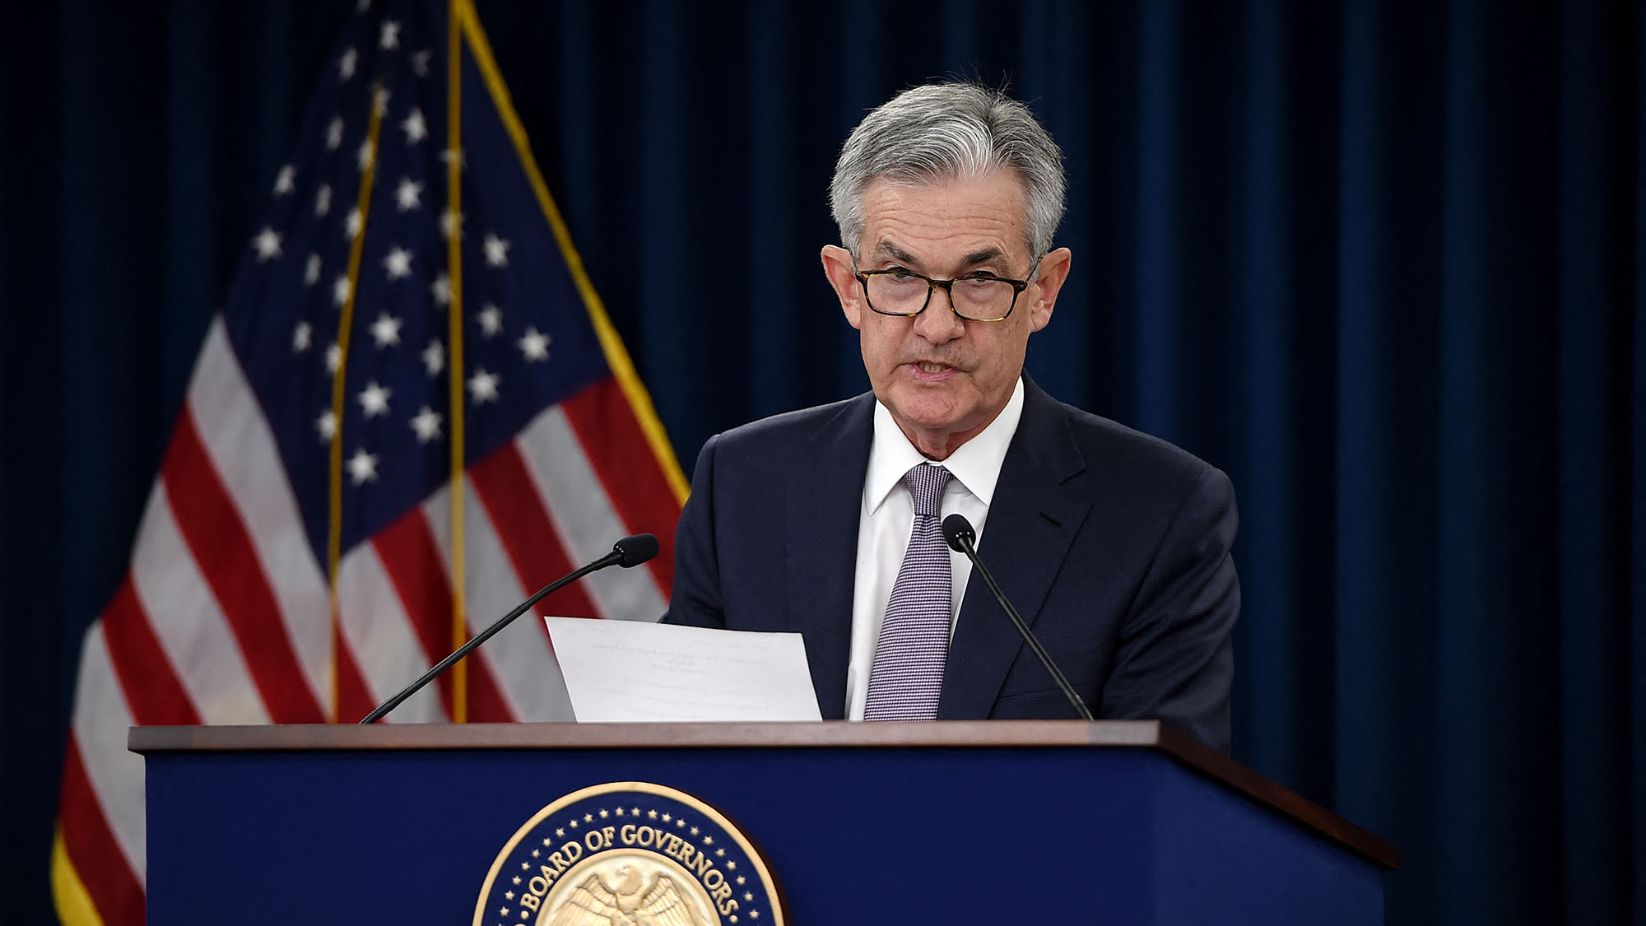 Federal Reserve Board Chairman Jerome Powell speaks at a news conference after a Federal Open Market Committee meeting on September 18, 2019 in Washington, DC. - The US Federal Reserve cut its benchmark interest rate for the second time this year on Wednesday but the policy committee is divided, with three of the 10 voting members dissenting.The central bank also moved to ease concerns about a cash crunch on financial markets by adjusting its key policy tool to help pump more funds through the financial plumbing. (Photo by Olivier Douliery / AFP)